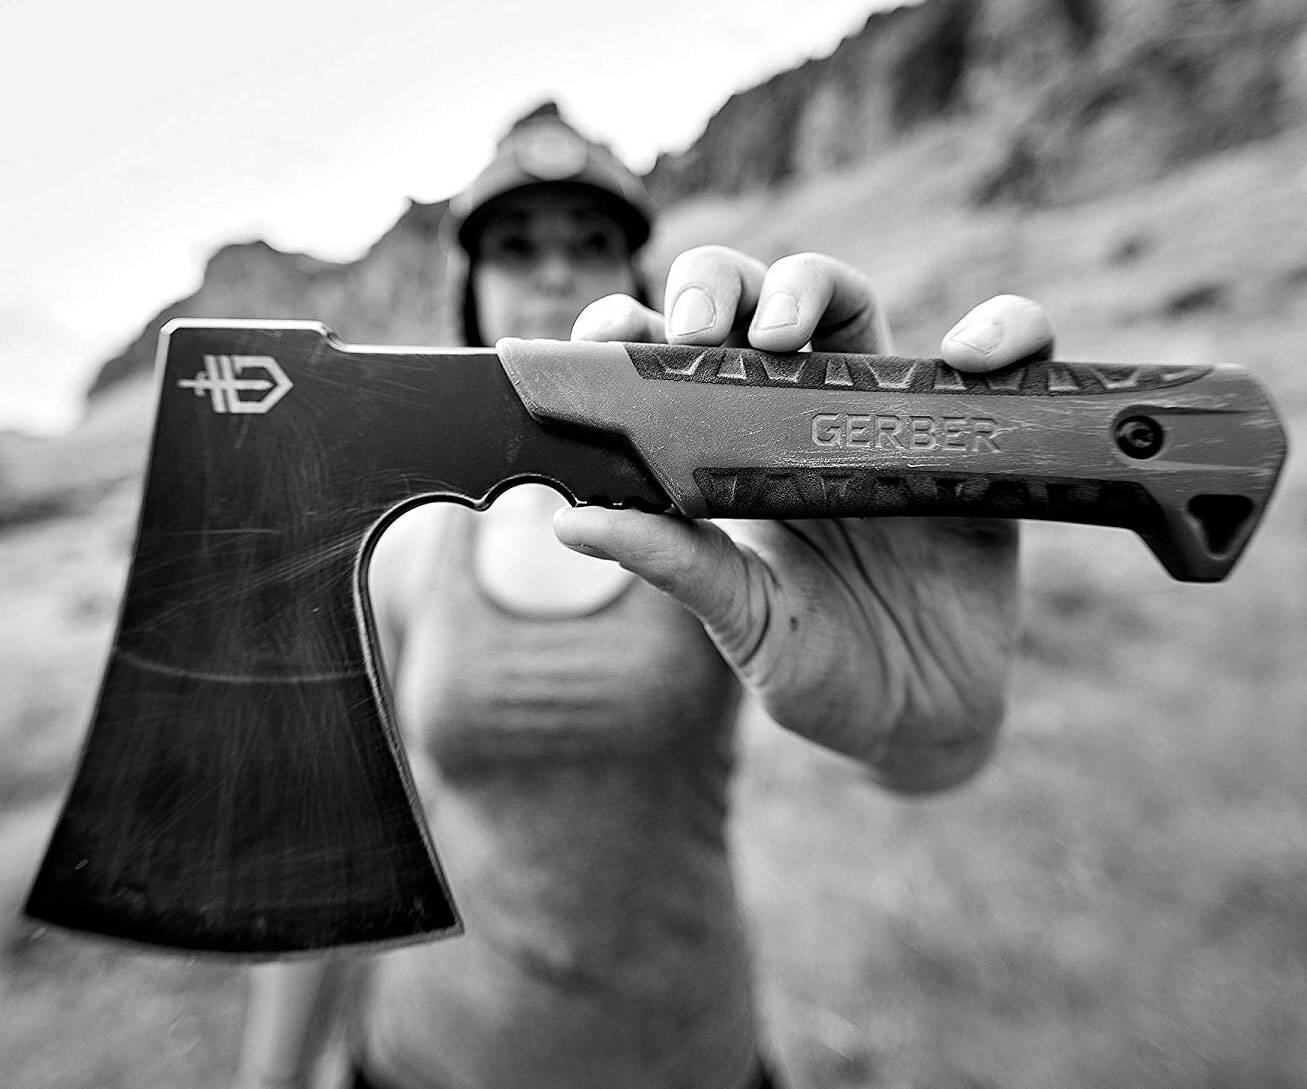 Gerber Pack Hatchet Camping Axe - //coolthings.us